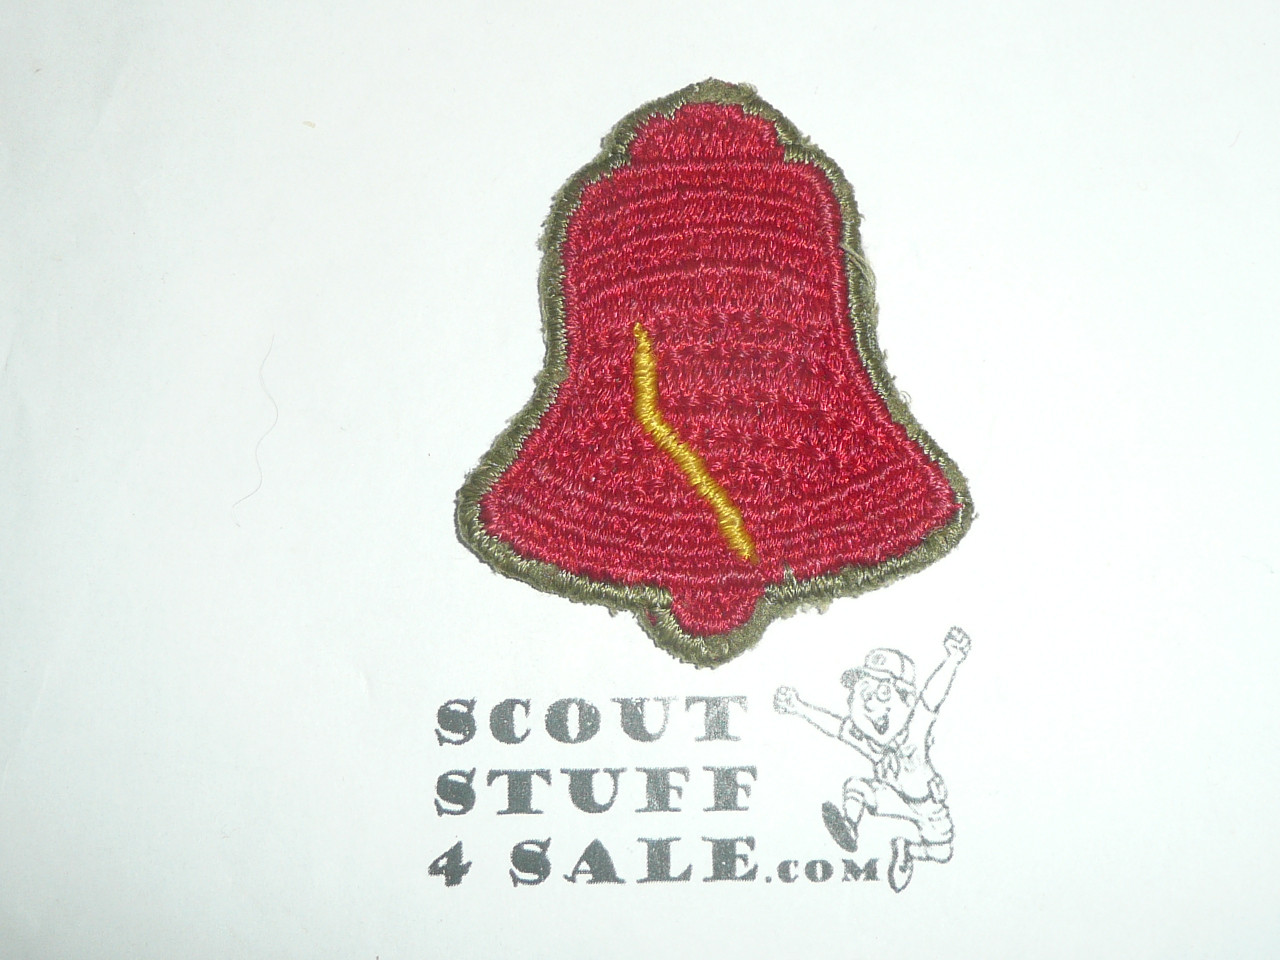 Philadelphia Council Liberty Bell Taining Patch, Red